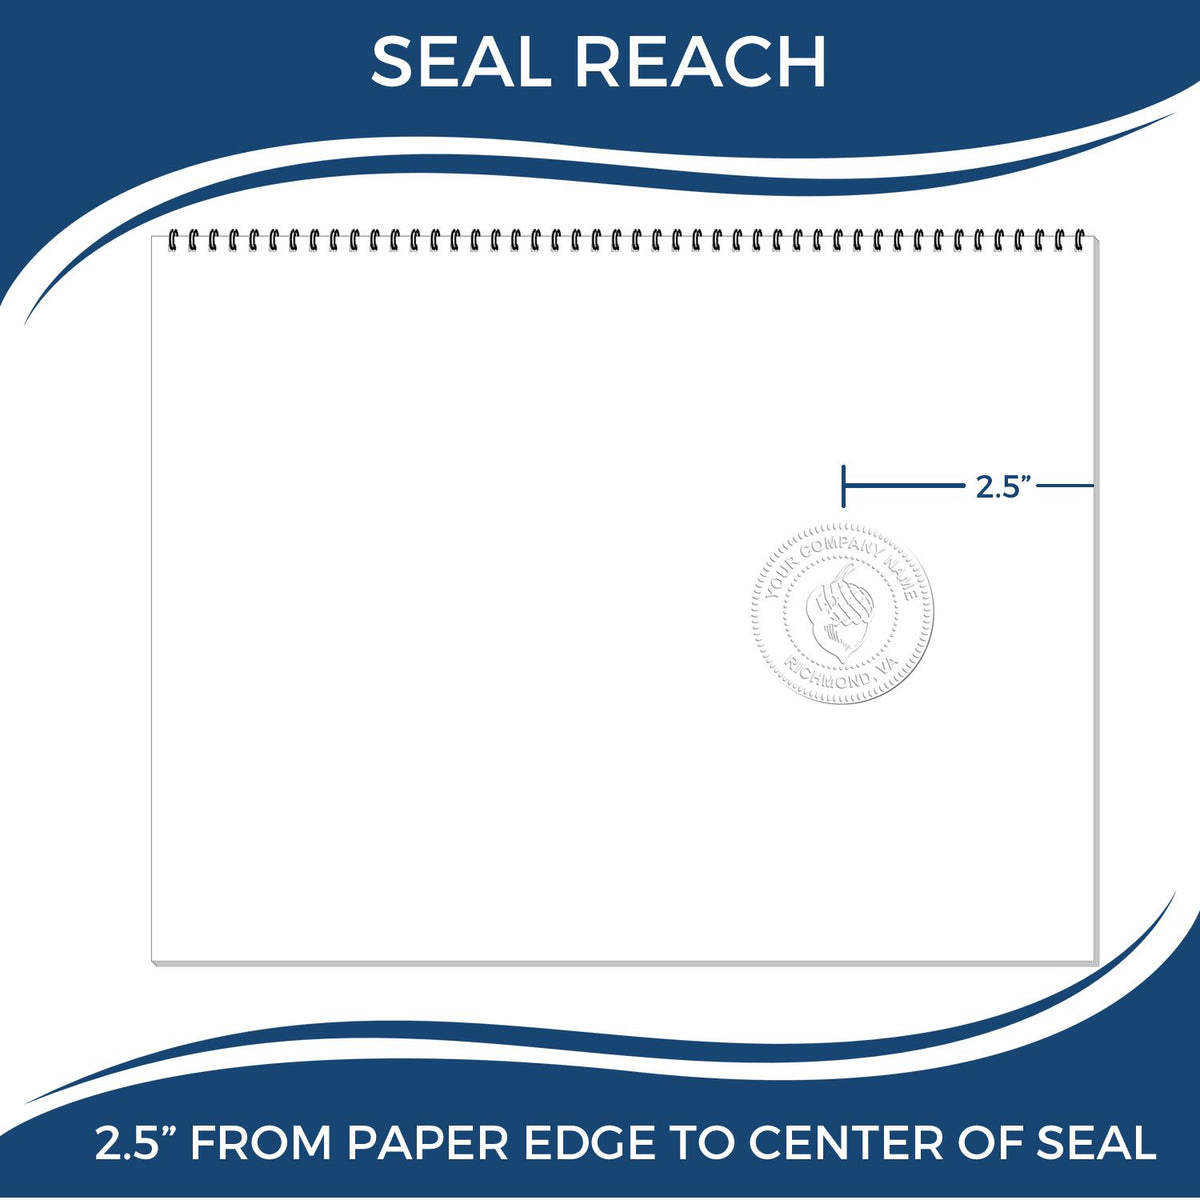 An infographic showing the seal reach which is represented by a ruler and a miniature seal image of the Heavy Duty Cast Iron Oregon Geologist Seal Embosser